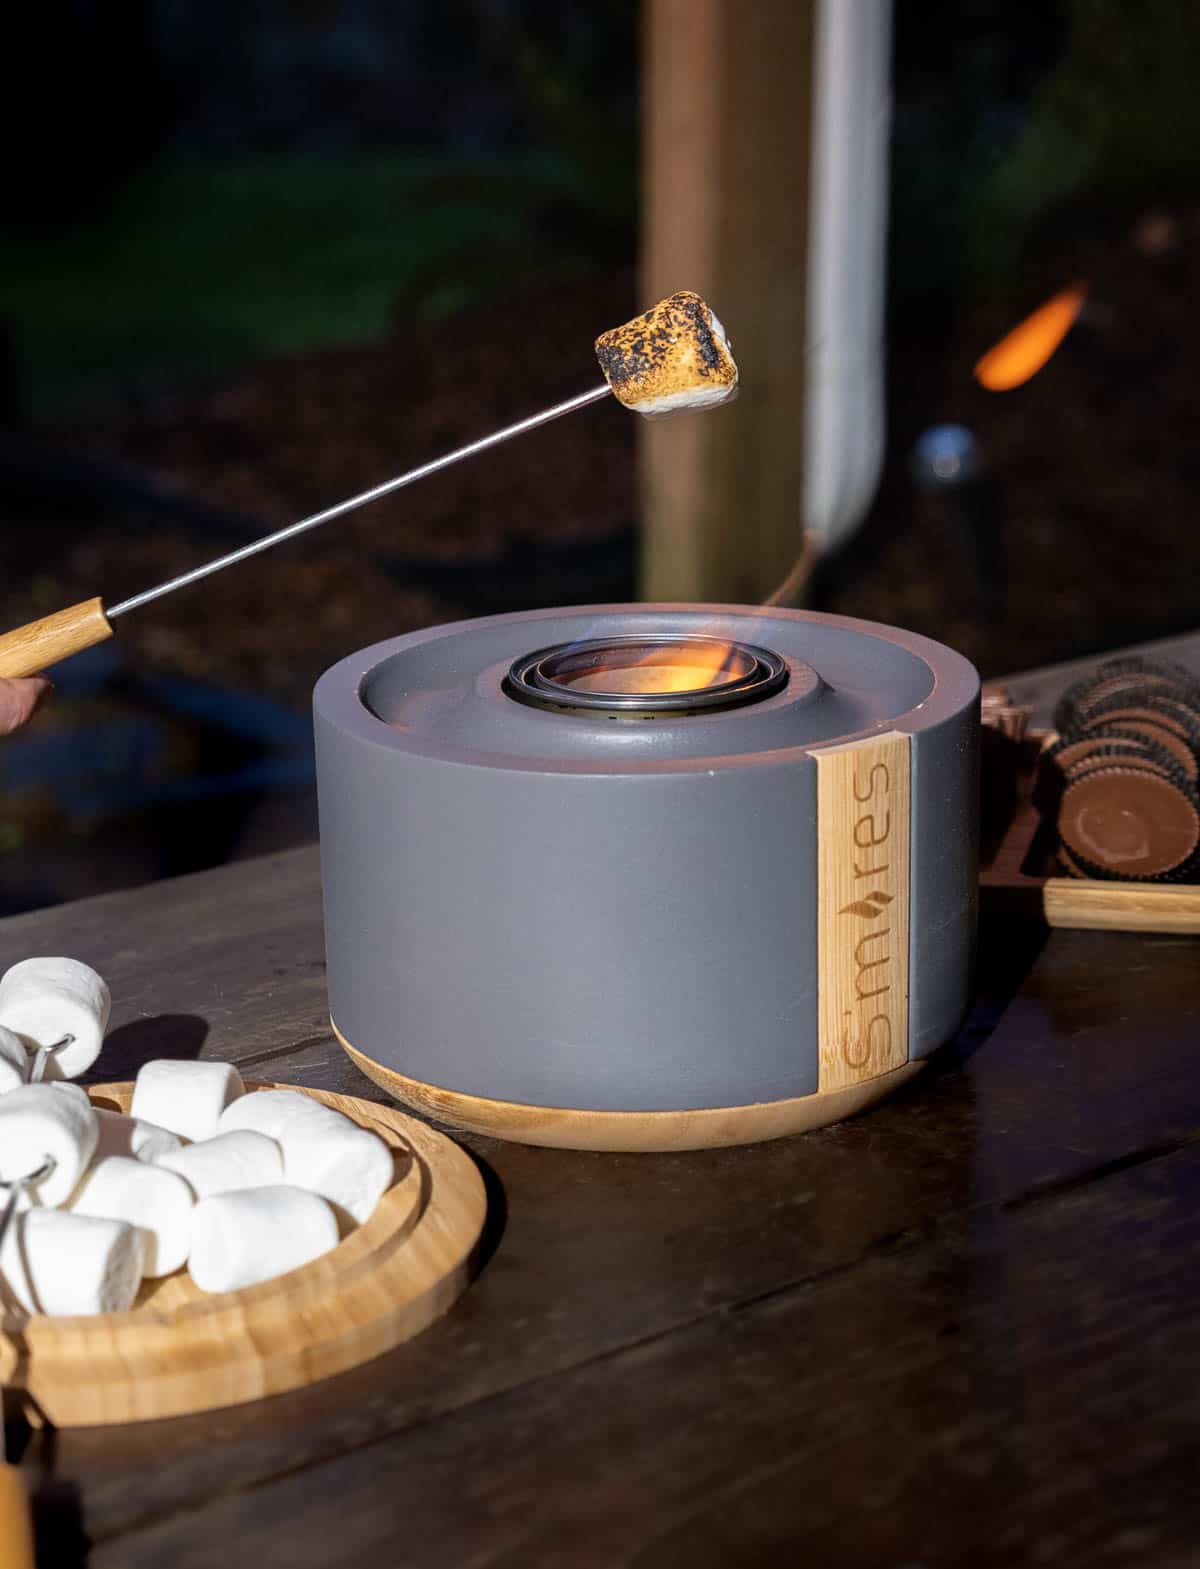 Terraflame S'mores kit with flame going and marshmallow being cooked.